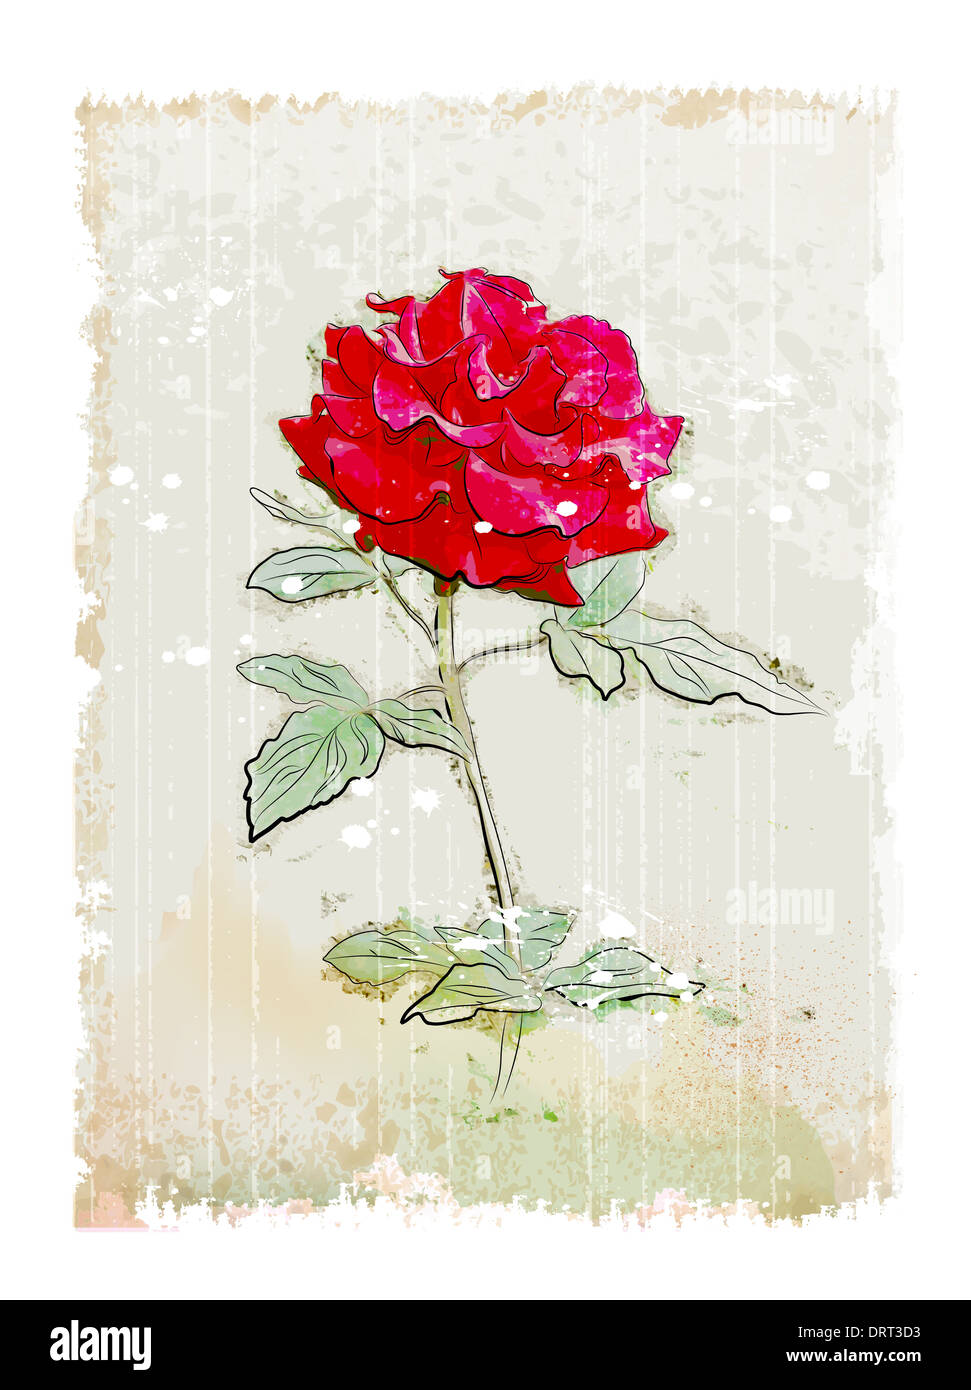 vintage red rose Stock Photo